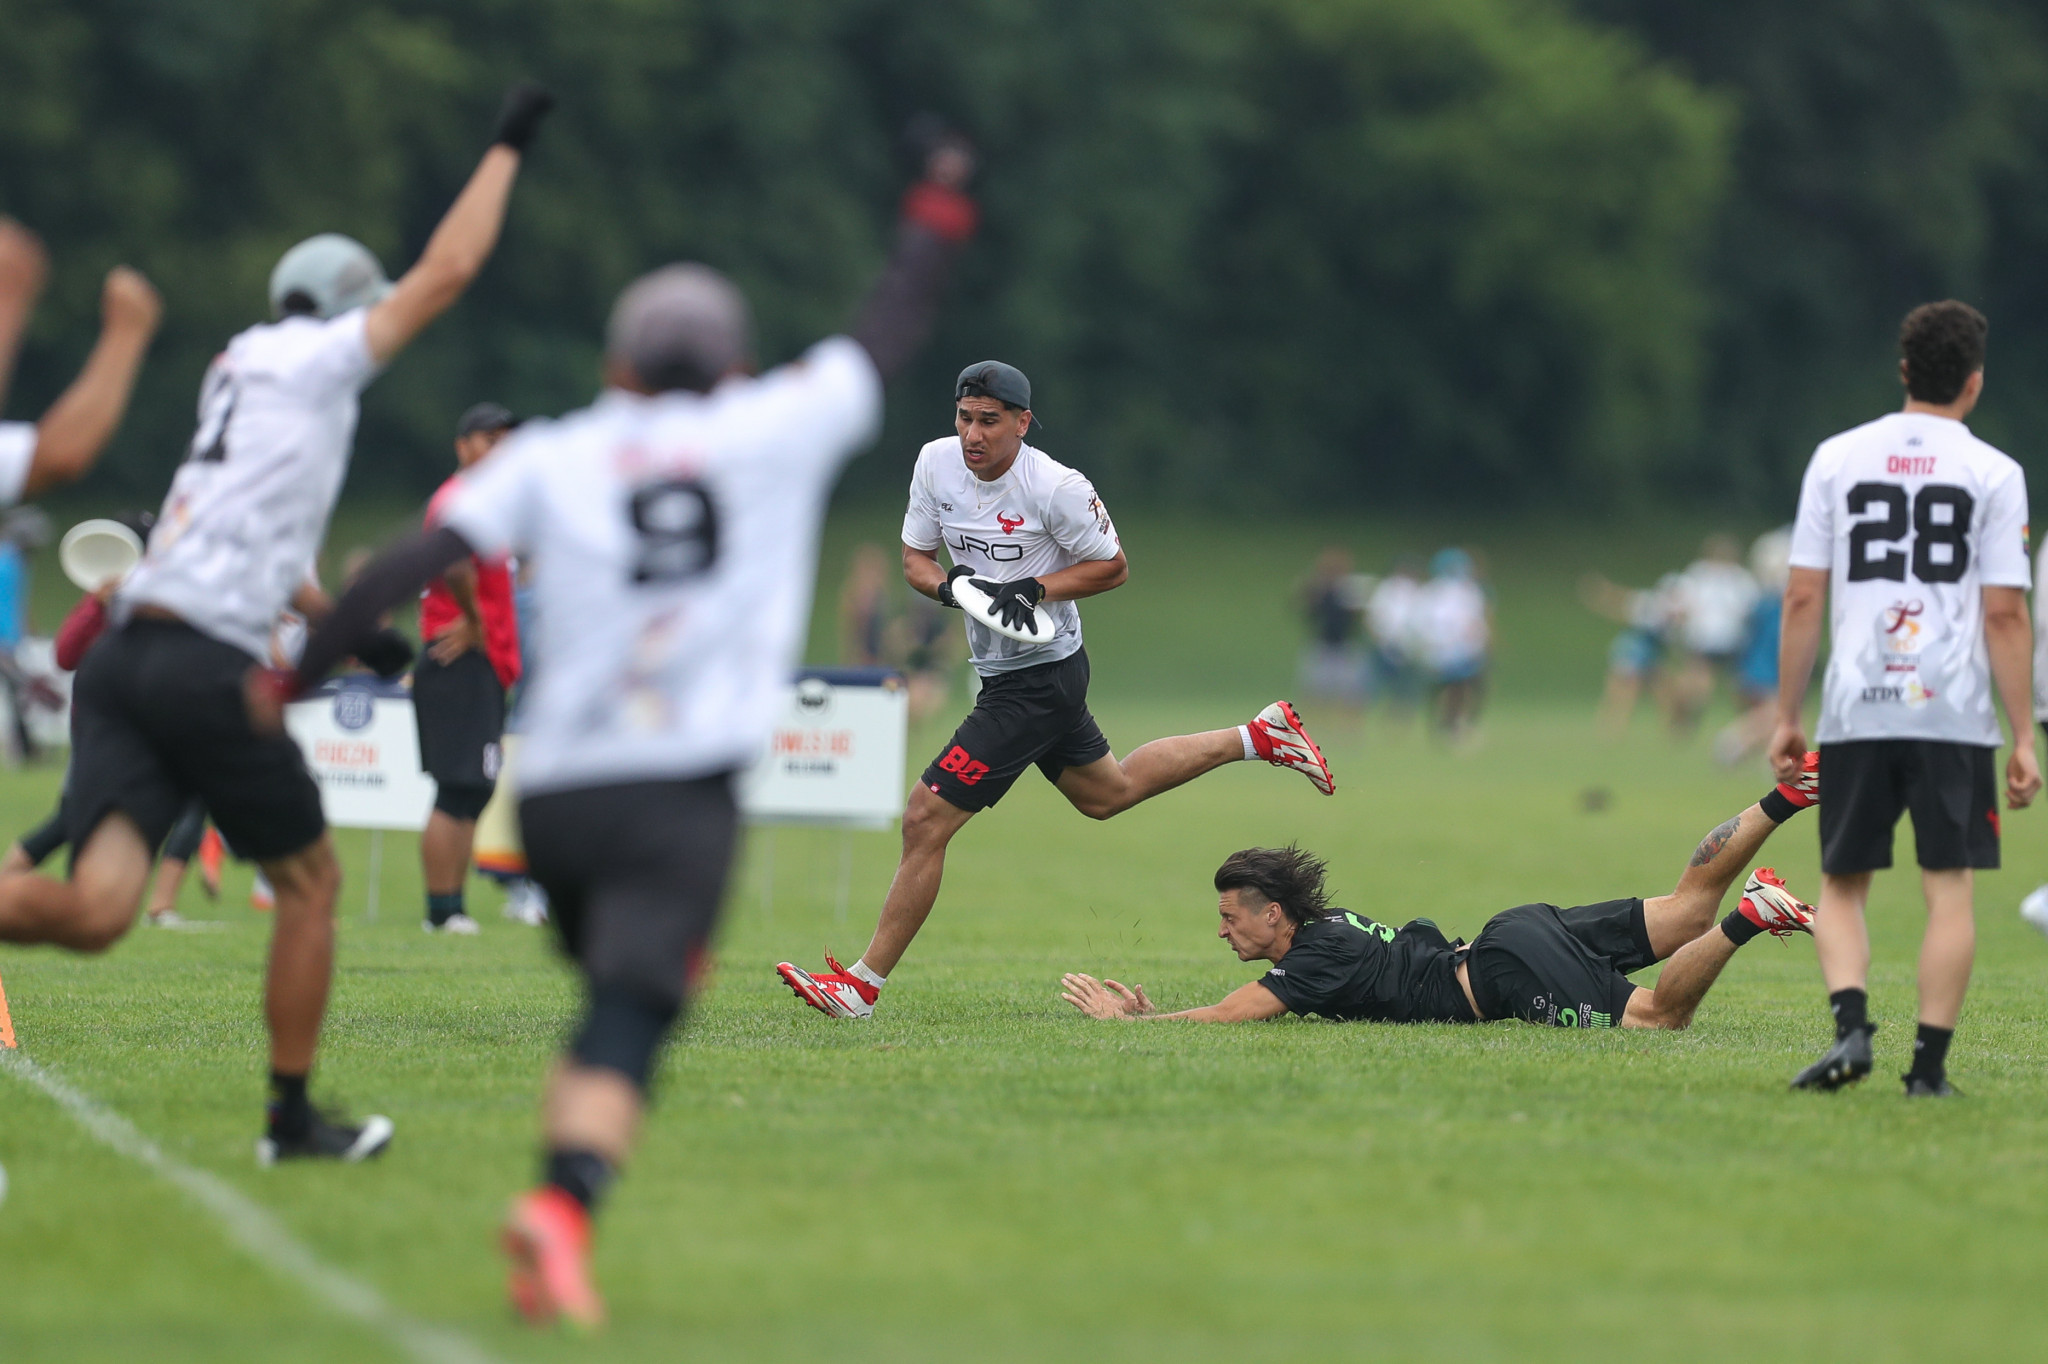 URO Monster fought hard against Melbourne Ellipsis but ultimately came up short in the Pool N duel ©Paul Rutherford for UltiPhotos